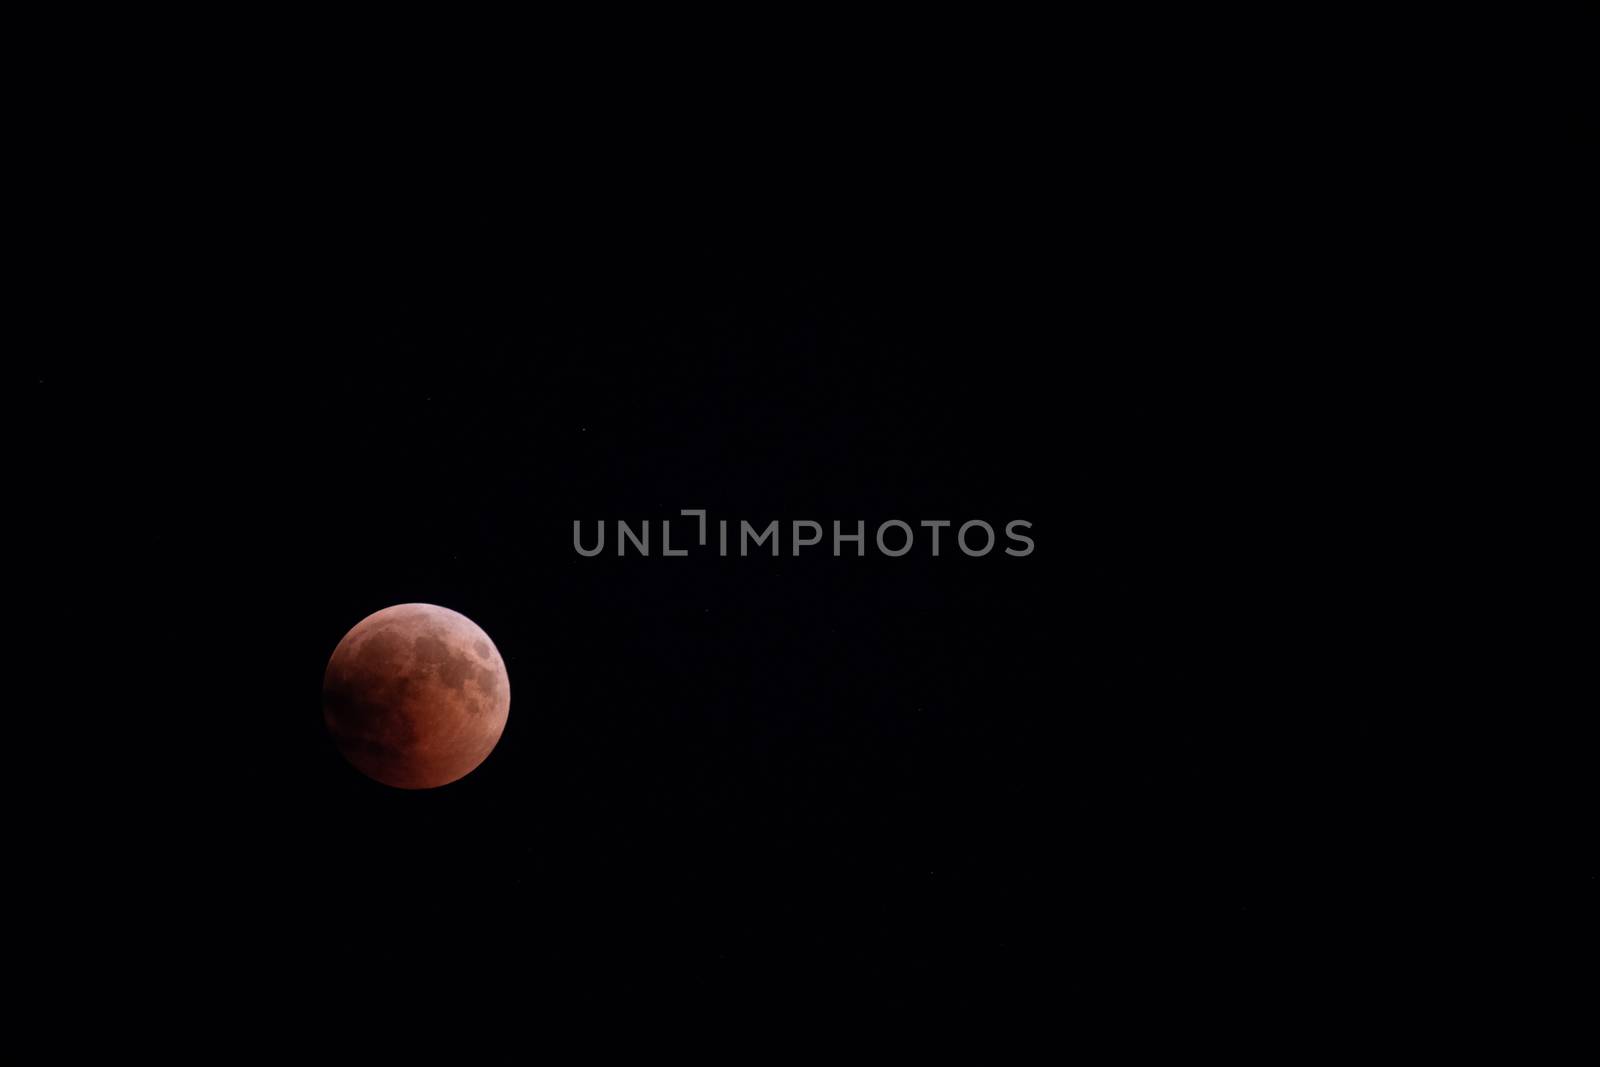 Blood moon during lunar eclipse, blood moon 2018, moon partially lit by sun, copyspace